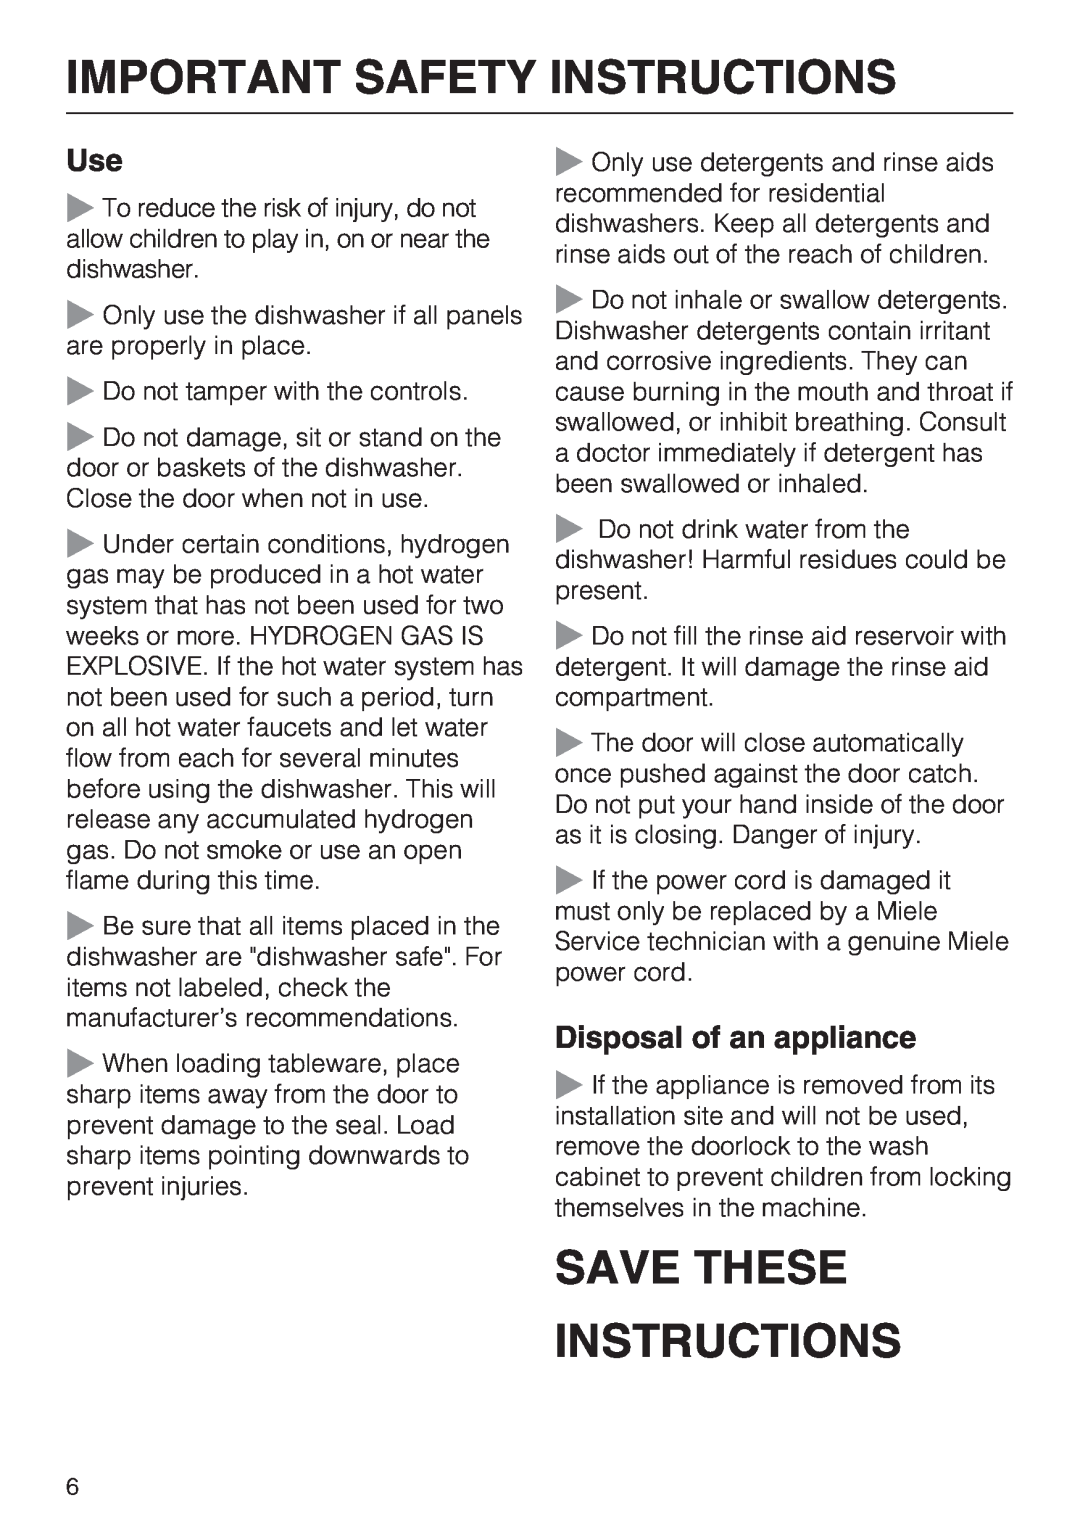 Miele G2142 operating instructions Save These Instructions, Disposal of an appliance, Important Safety Instructions 